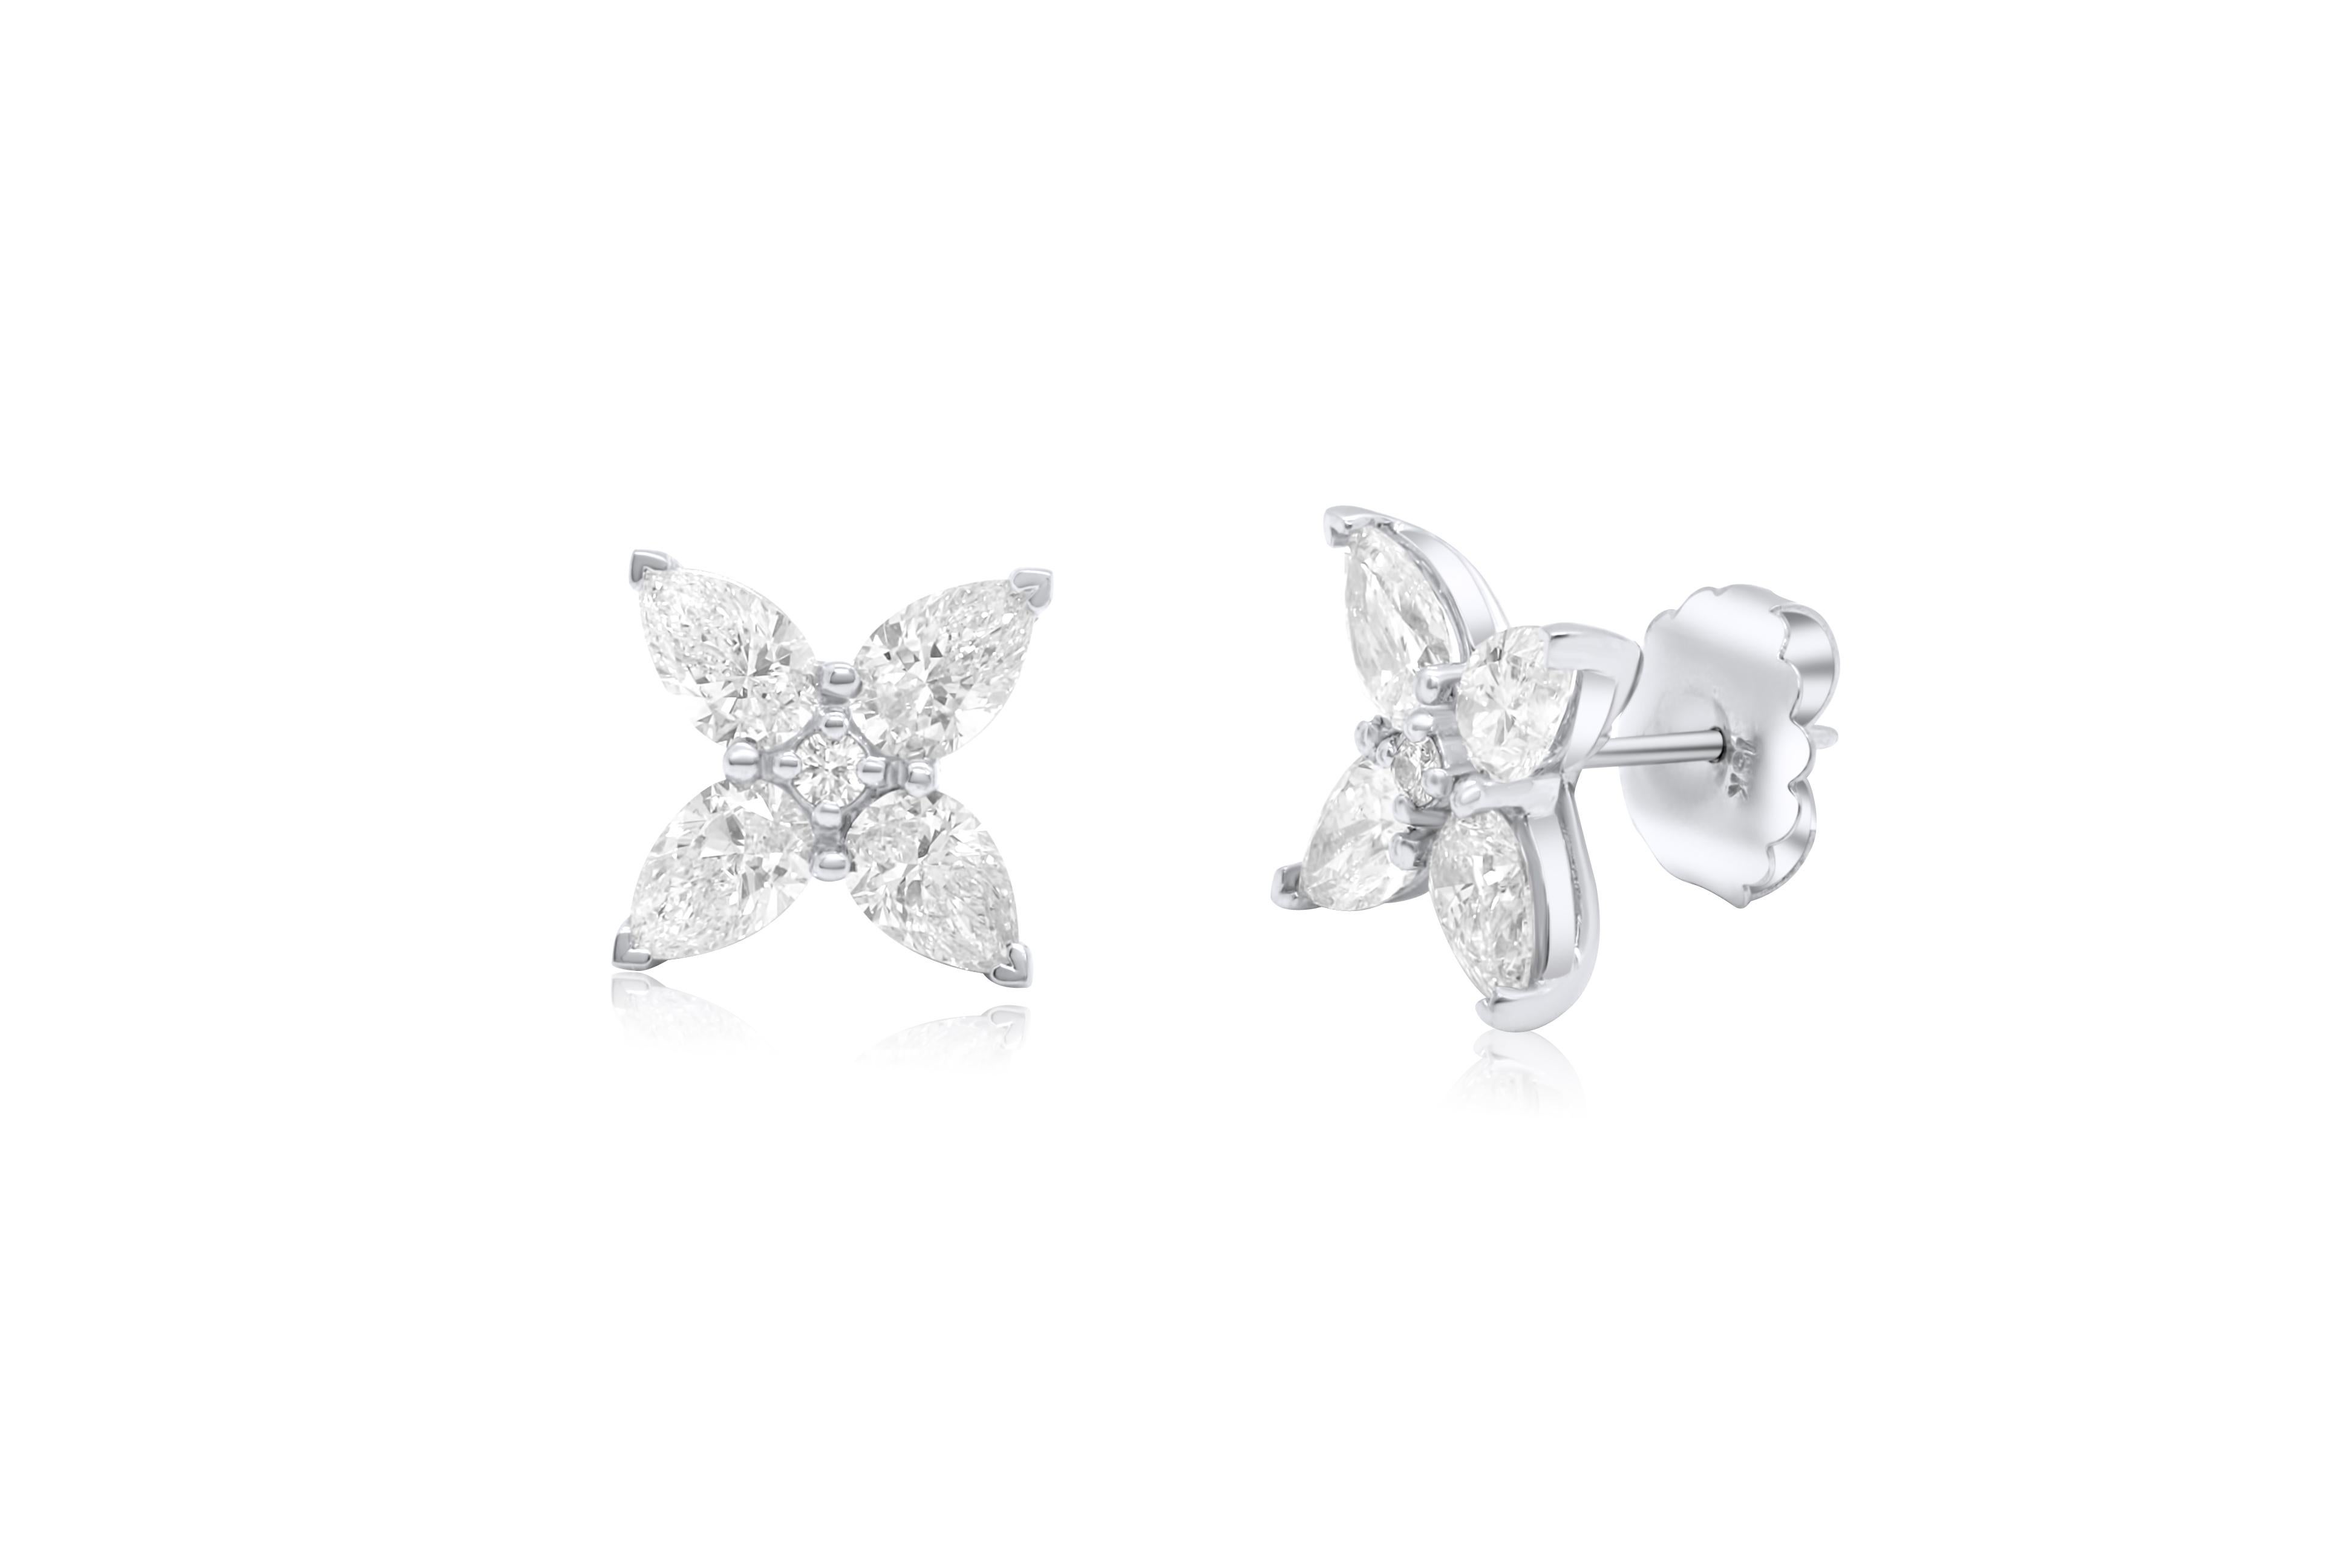 Modern Diana M. PLATINUM EARRING STUDS WITH PEAR SHAPE DIAMONDS 4.09CTS  For Sale